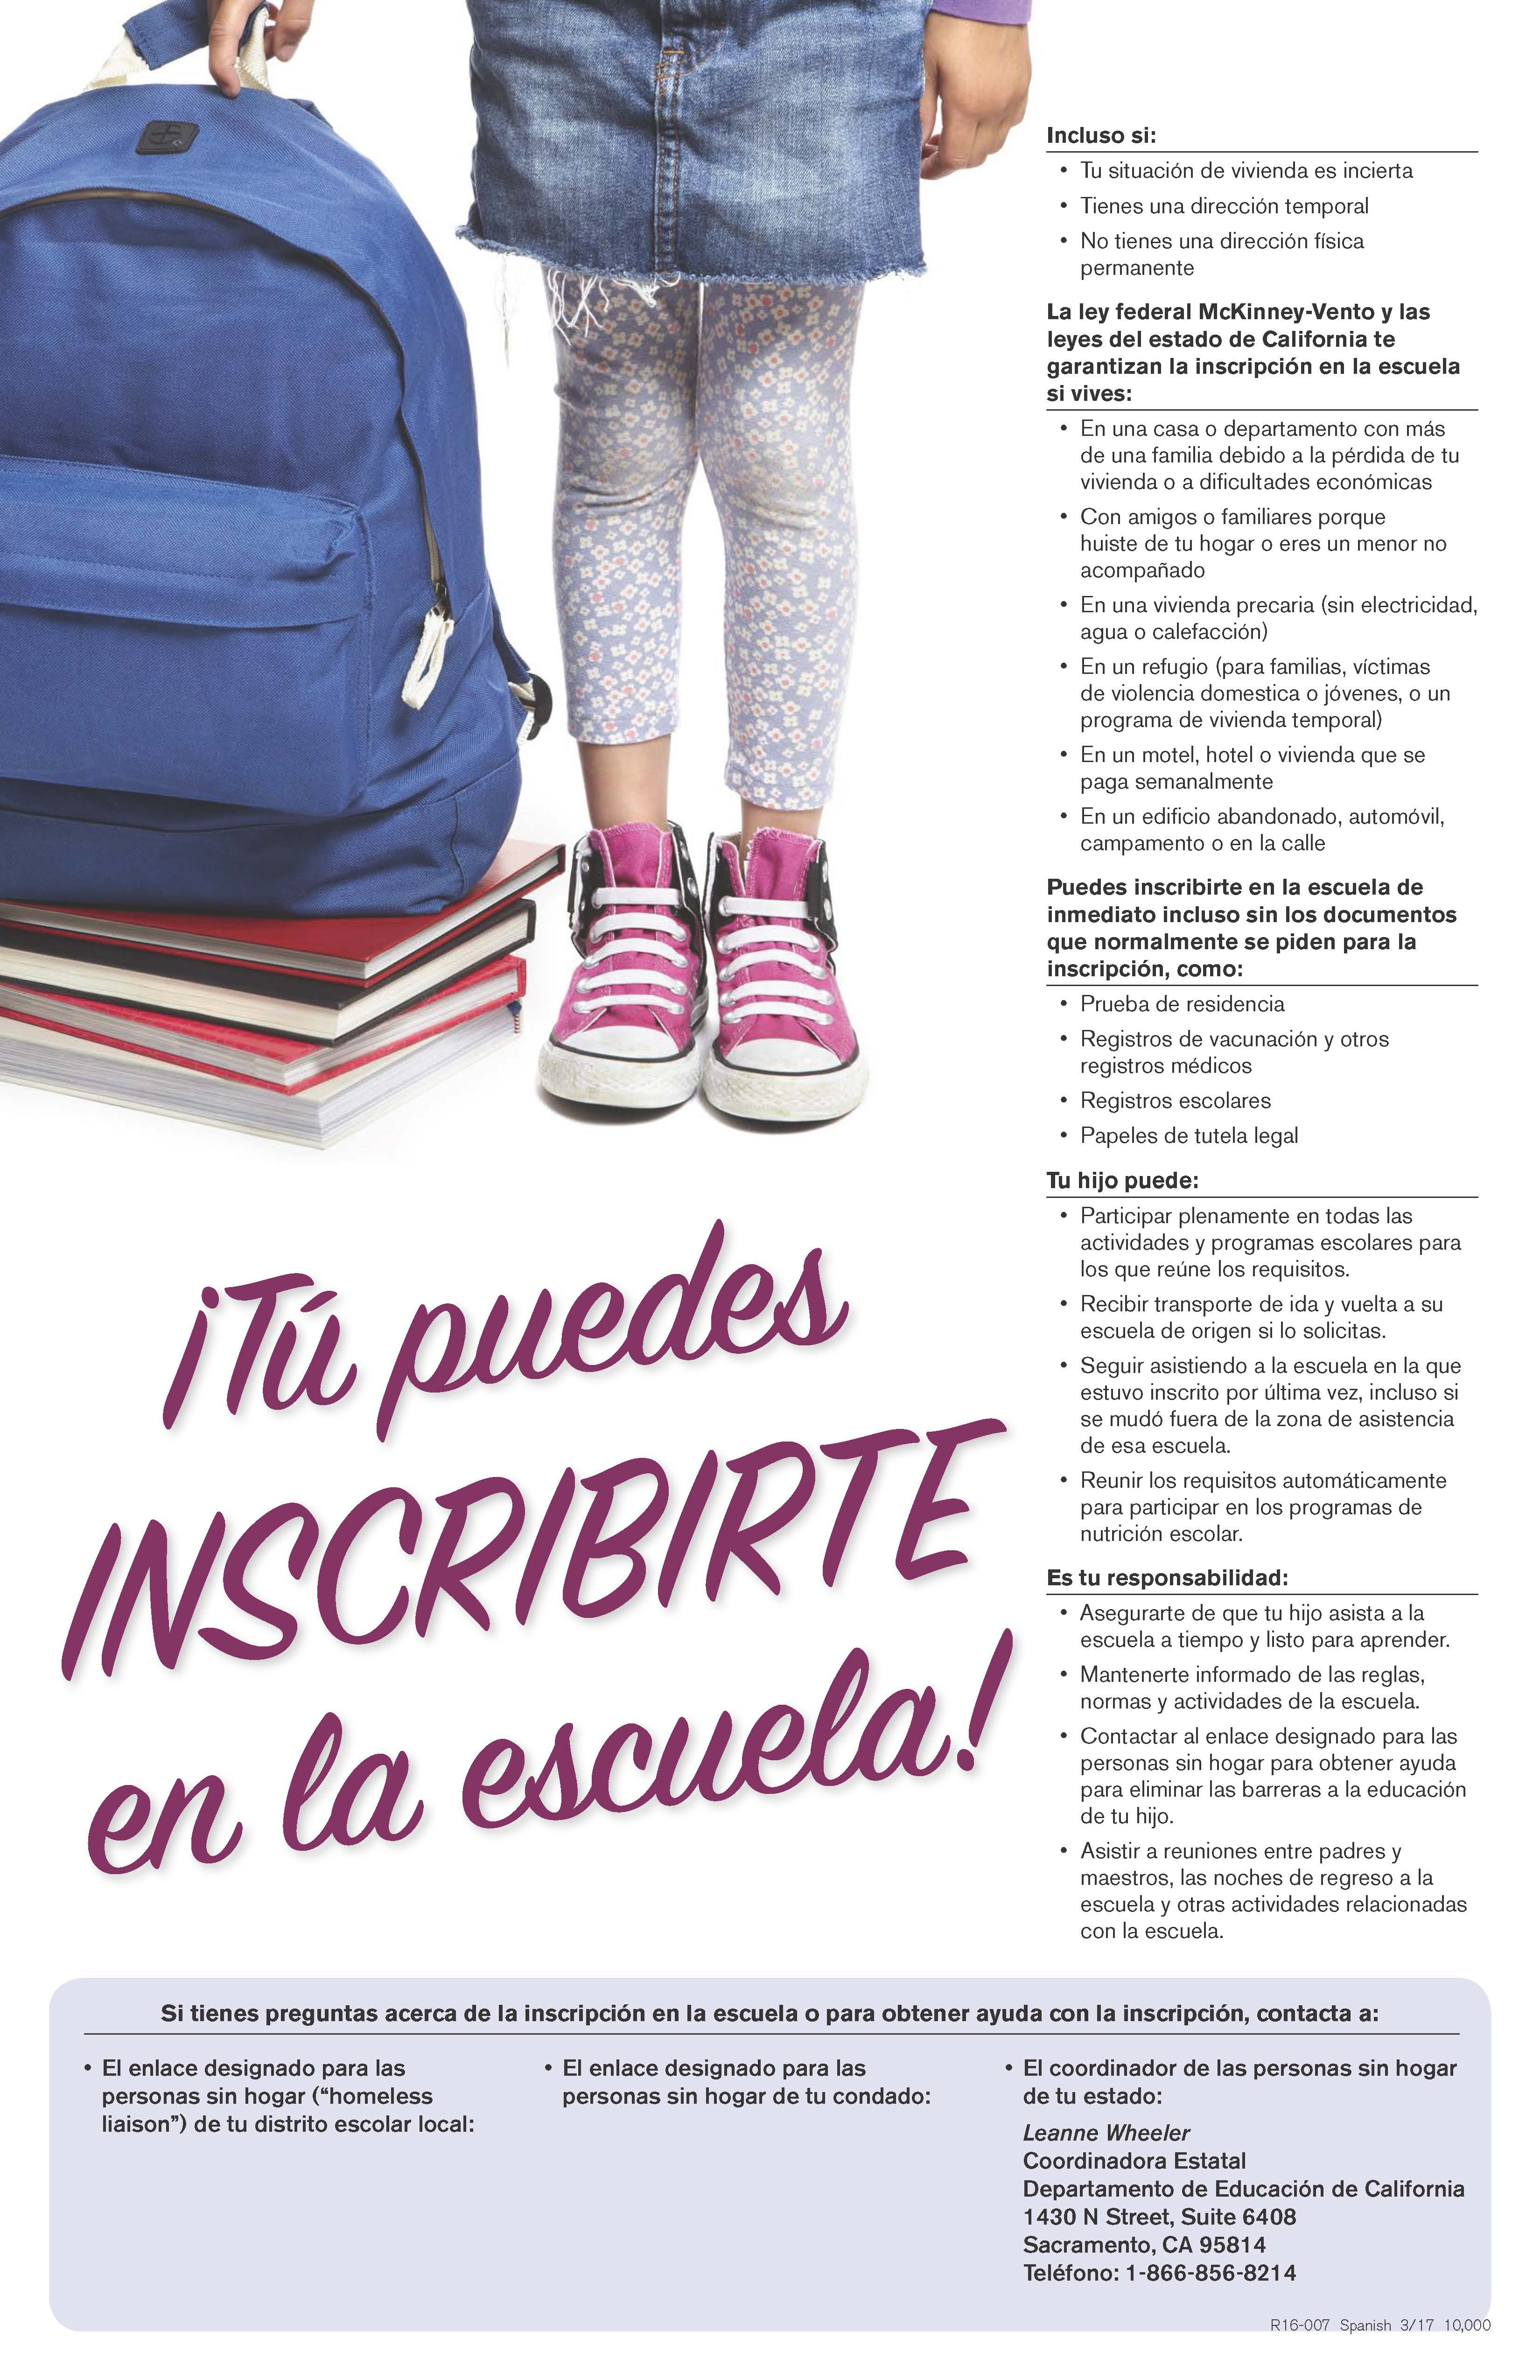 Poster with a child holding a backpack